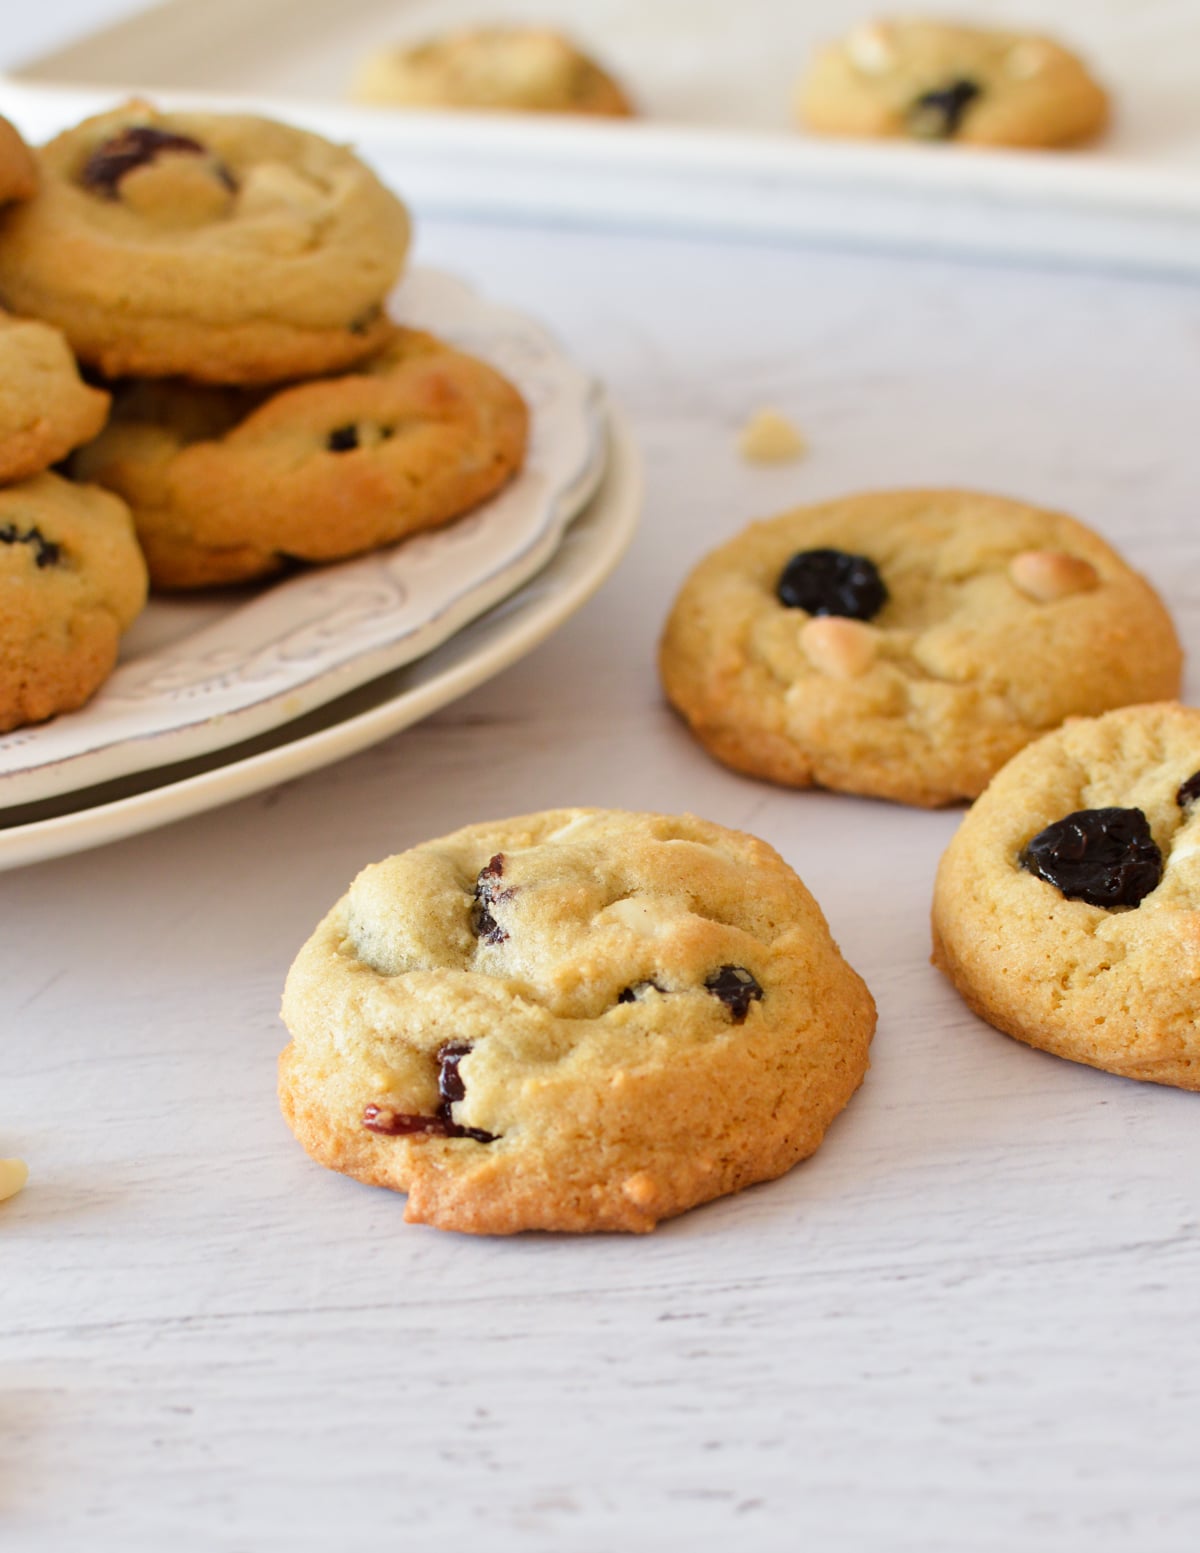 a cookie with dried cherries and white chocolate chips.